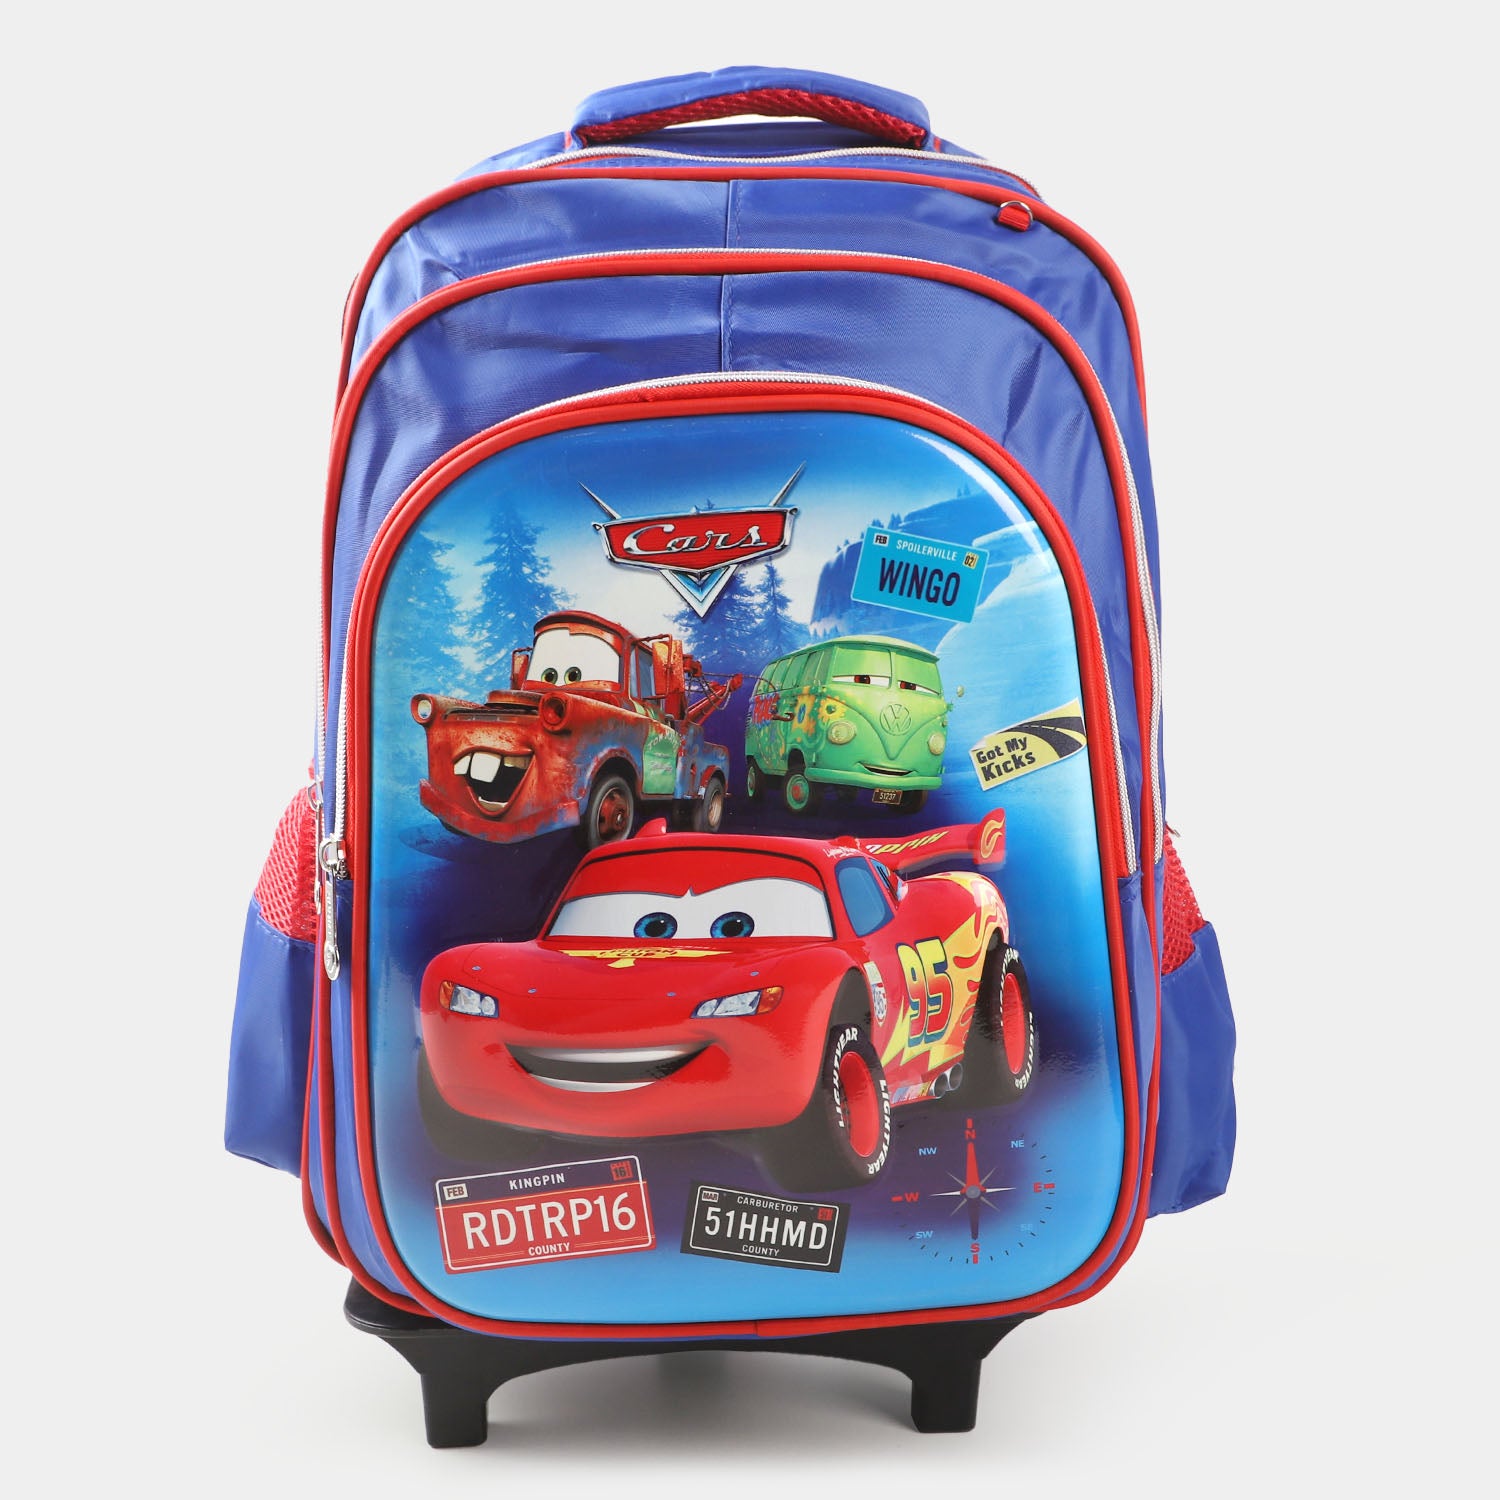 School Backpack With Trolley For Kids Price in Pakistan